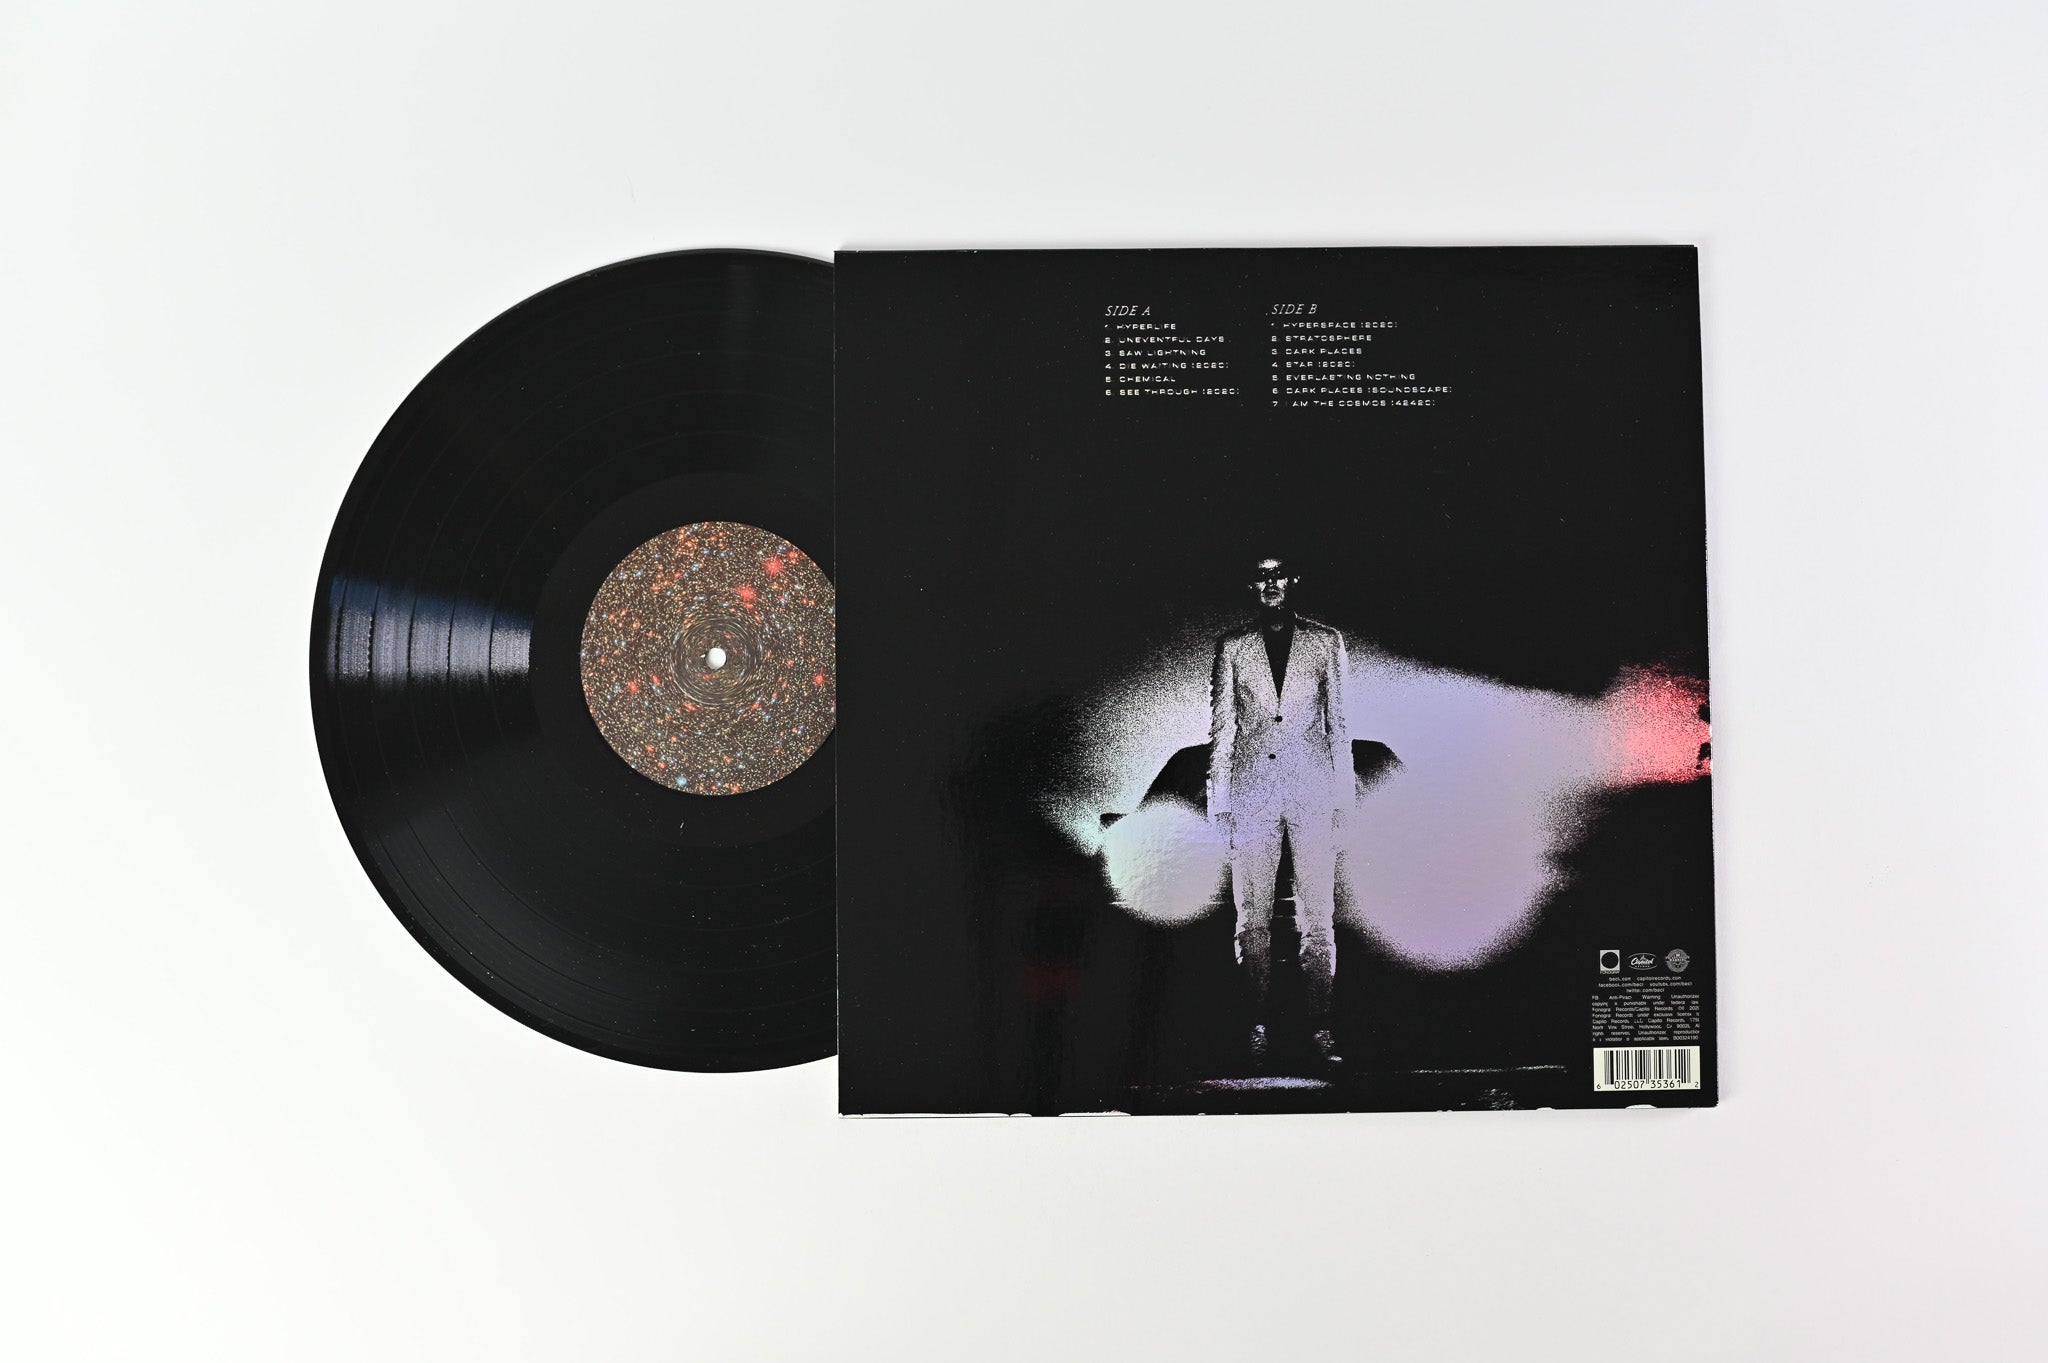 Beck - Hyperspace (2020) on Fonograf Ltd Deluxe Edition